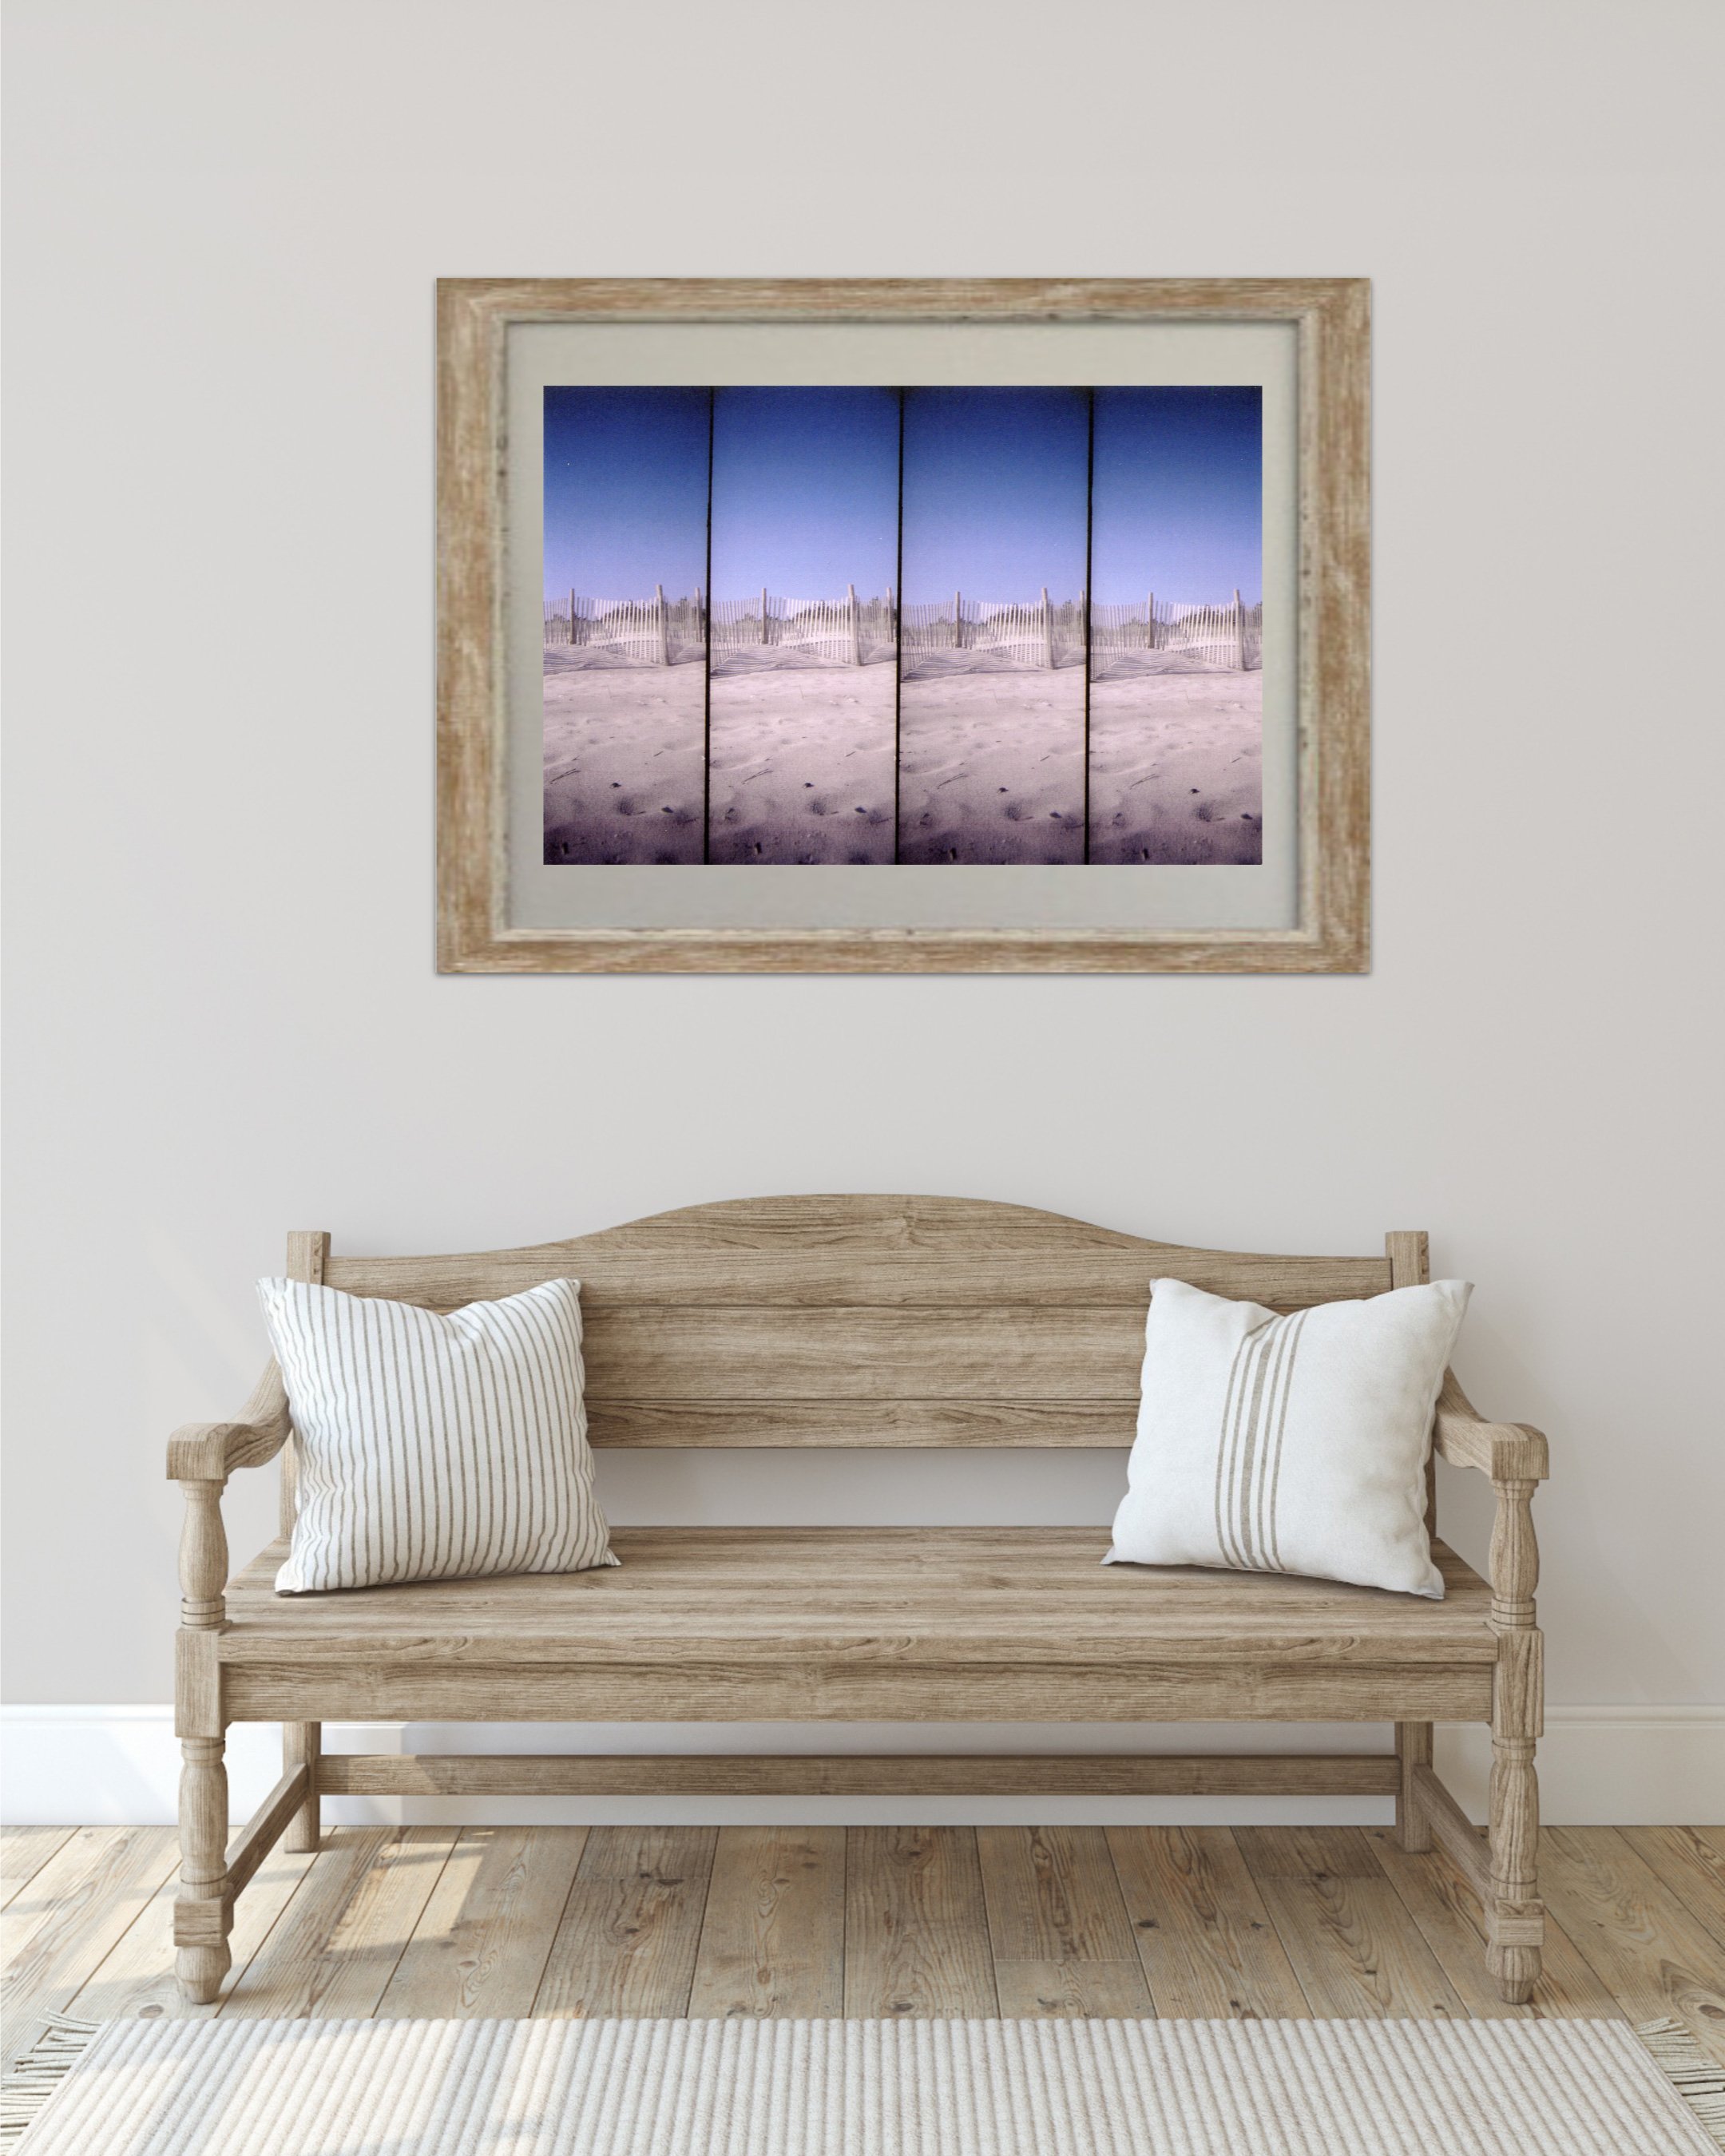 beach-quattro-in-larger-frame-with-wicker-seat-in-room.jpg